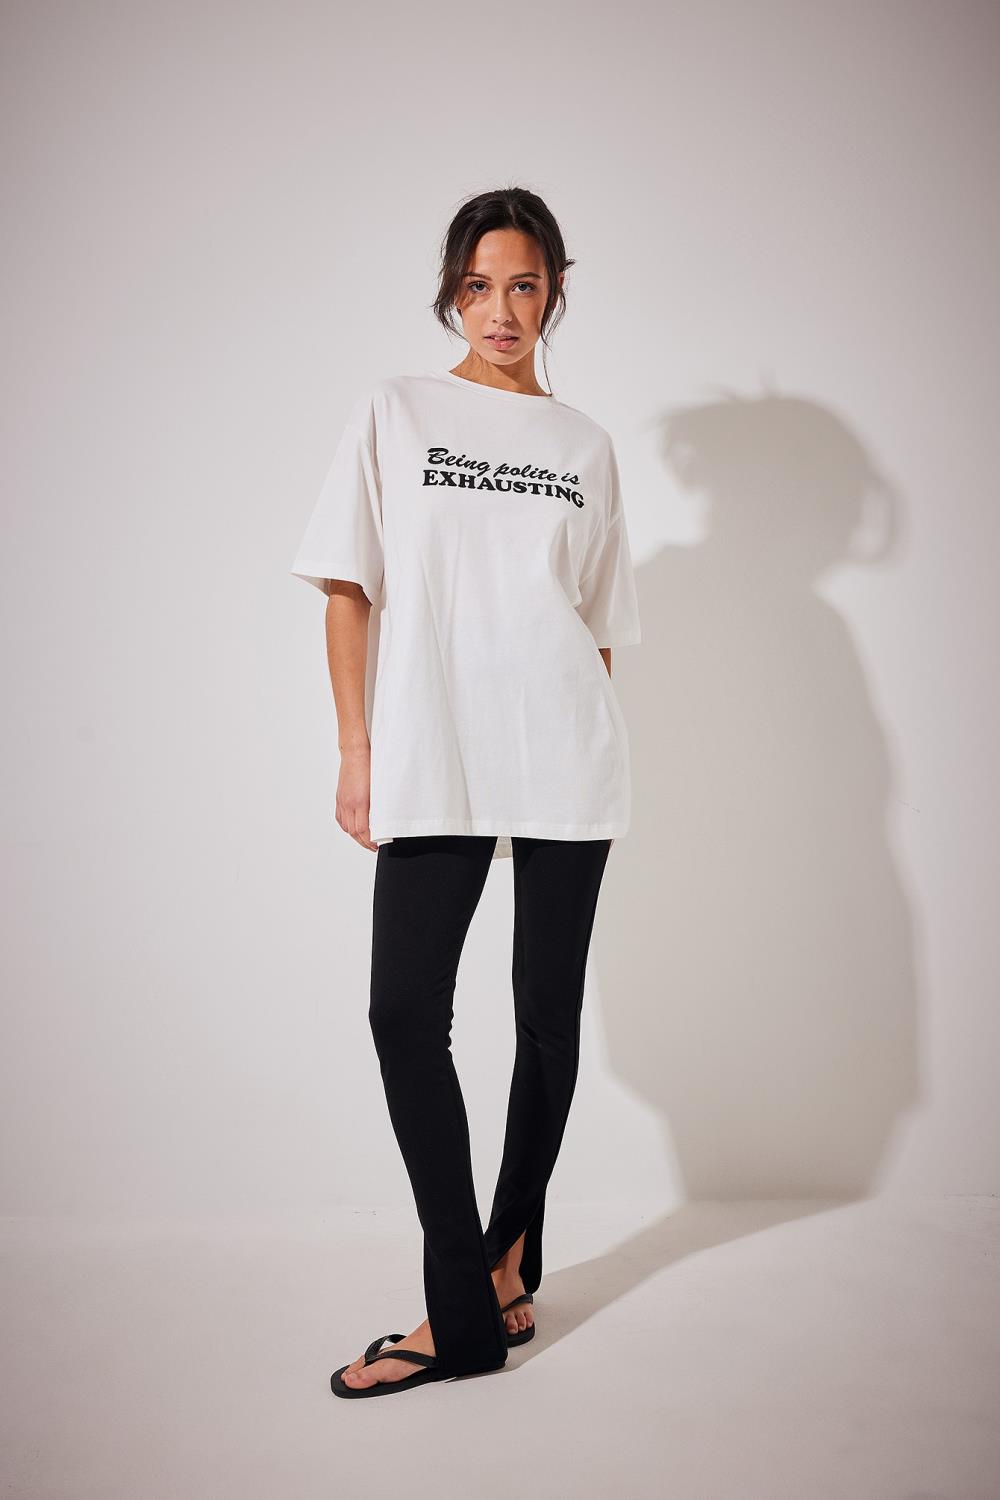 THE OVERSIZED CITY PRINT TSHIRT - BEING POLITE IS HUH - EXCLUSIVE Tops from NA-KD - Just €36! SHOP NOW AT IAMINHATELOVE BOTH IN STORE FOR CYPRUS AND ONLINE WORLDWIDE @ IAMINHATELOVE.COM